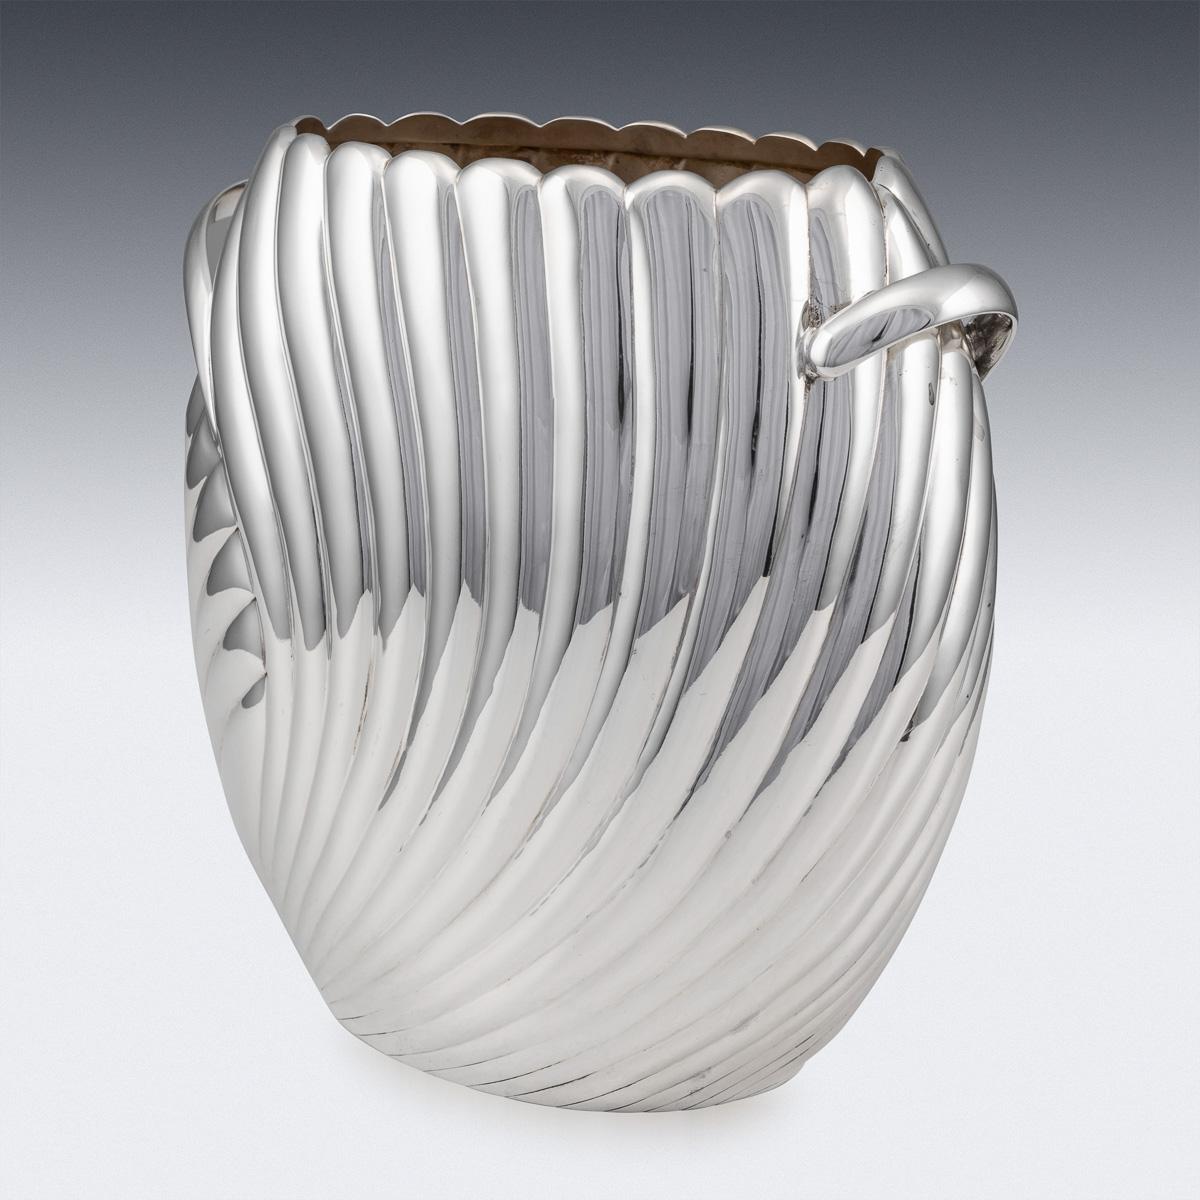 20th Century Italian Solid Silver Decorative Vase, Bedetti, Rome, c.1980 In Good Condition For Sale In Royal Tunbridge Wells, Kent